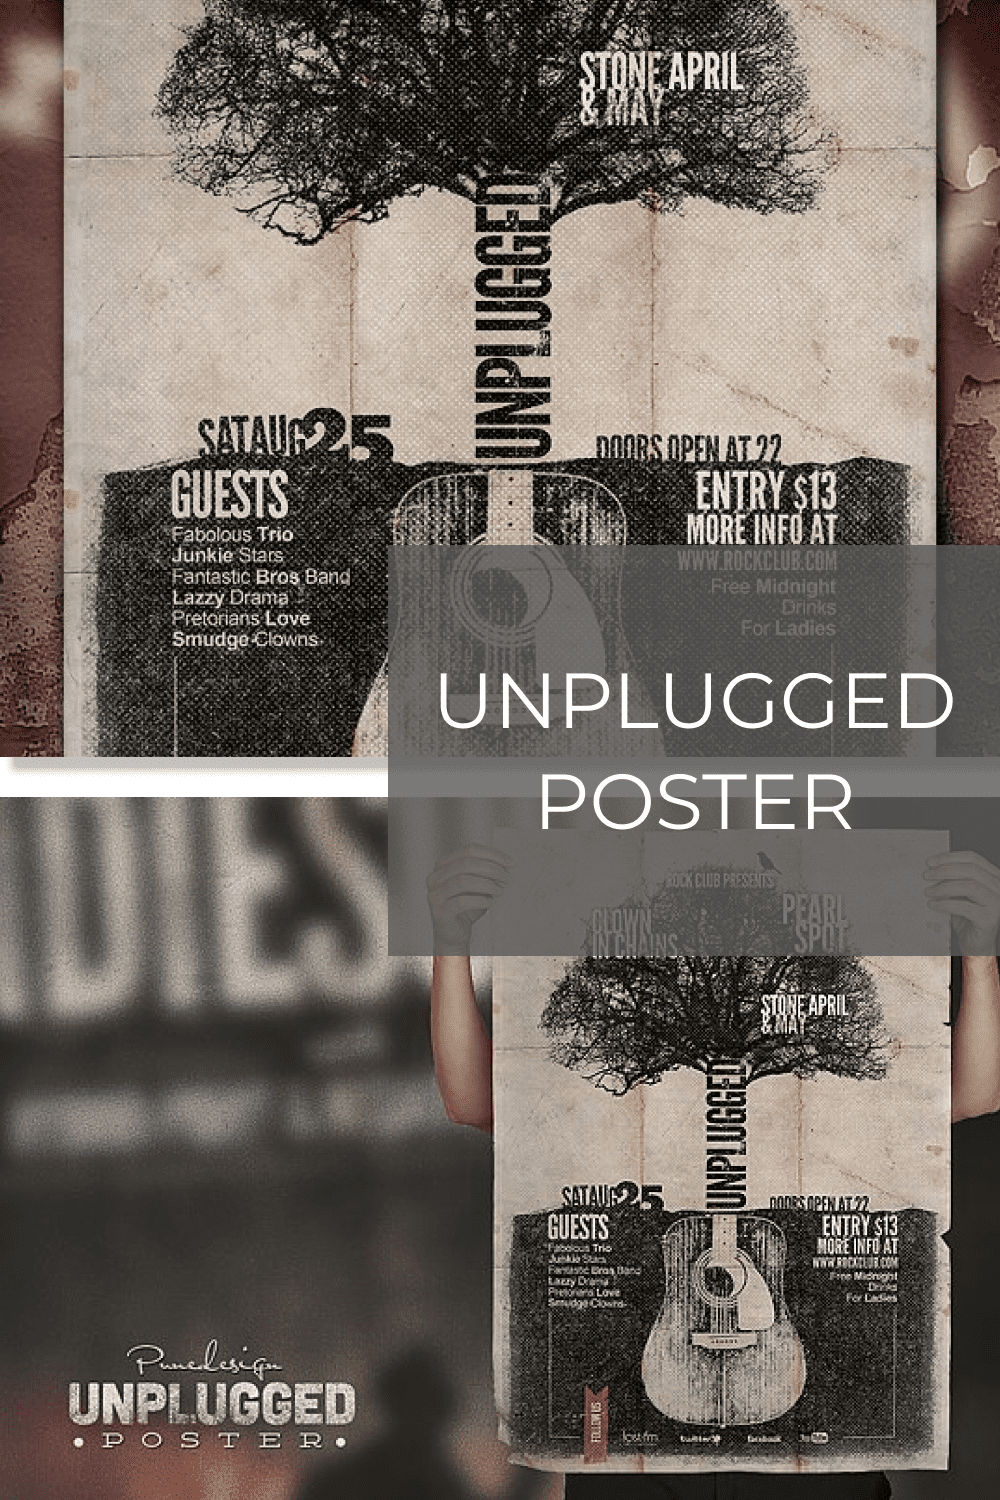 Unplugged Poster pinterest image.